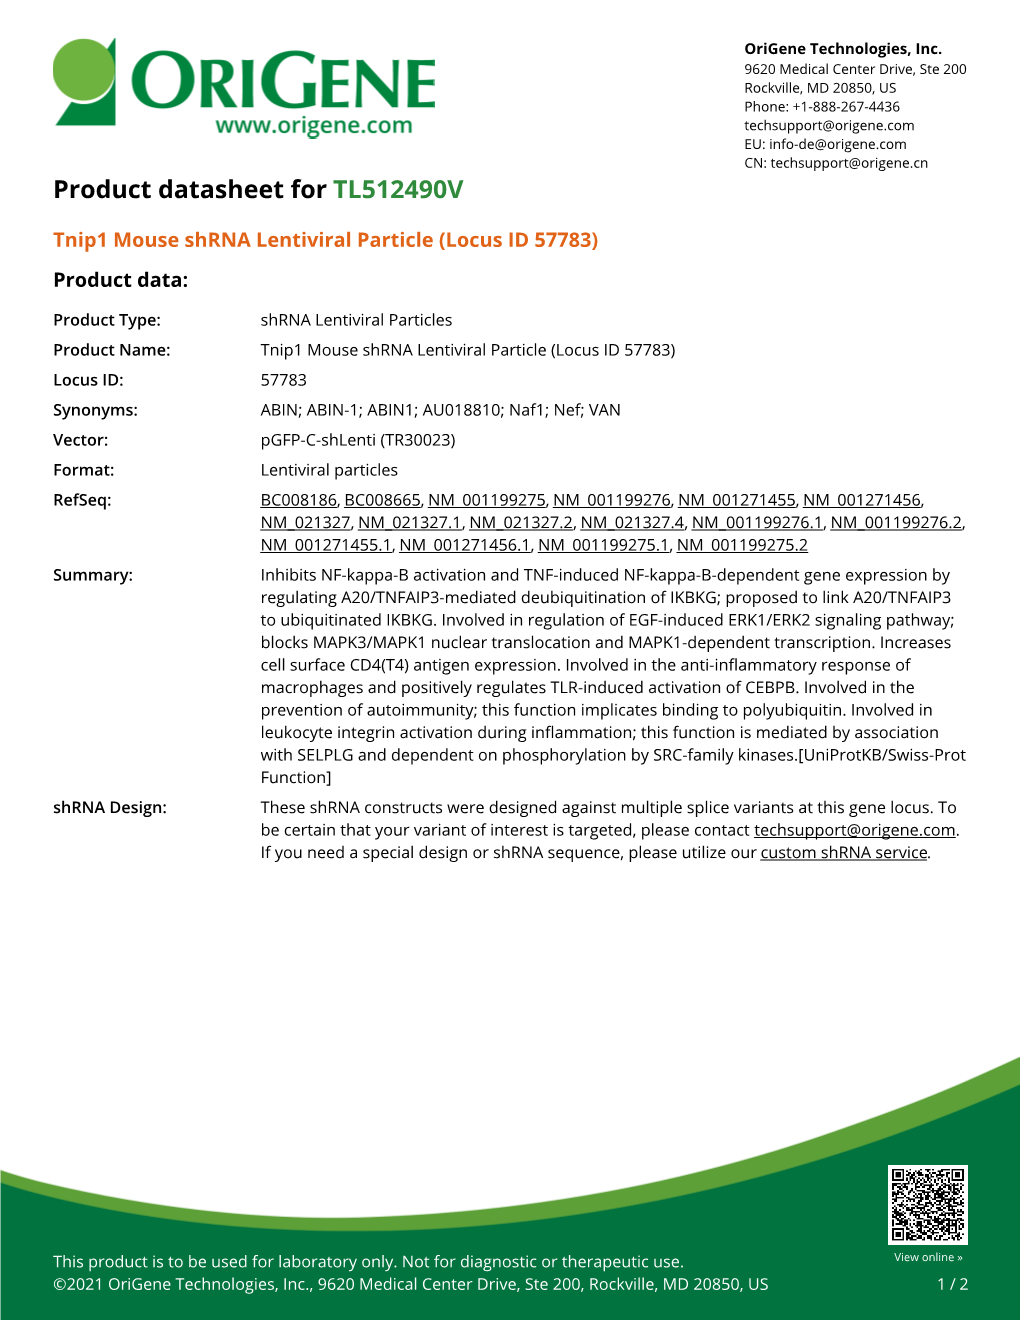 Tnip1 Mouse Shrna Lentiviral Particle (Locus ID 57783) Product Data